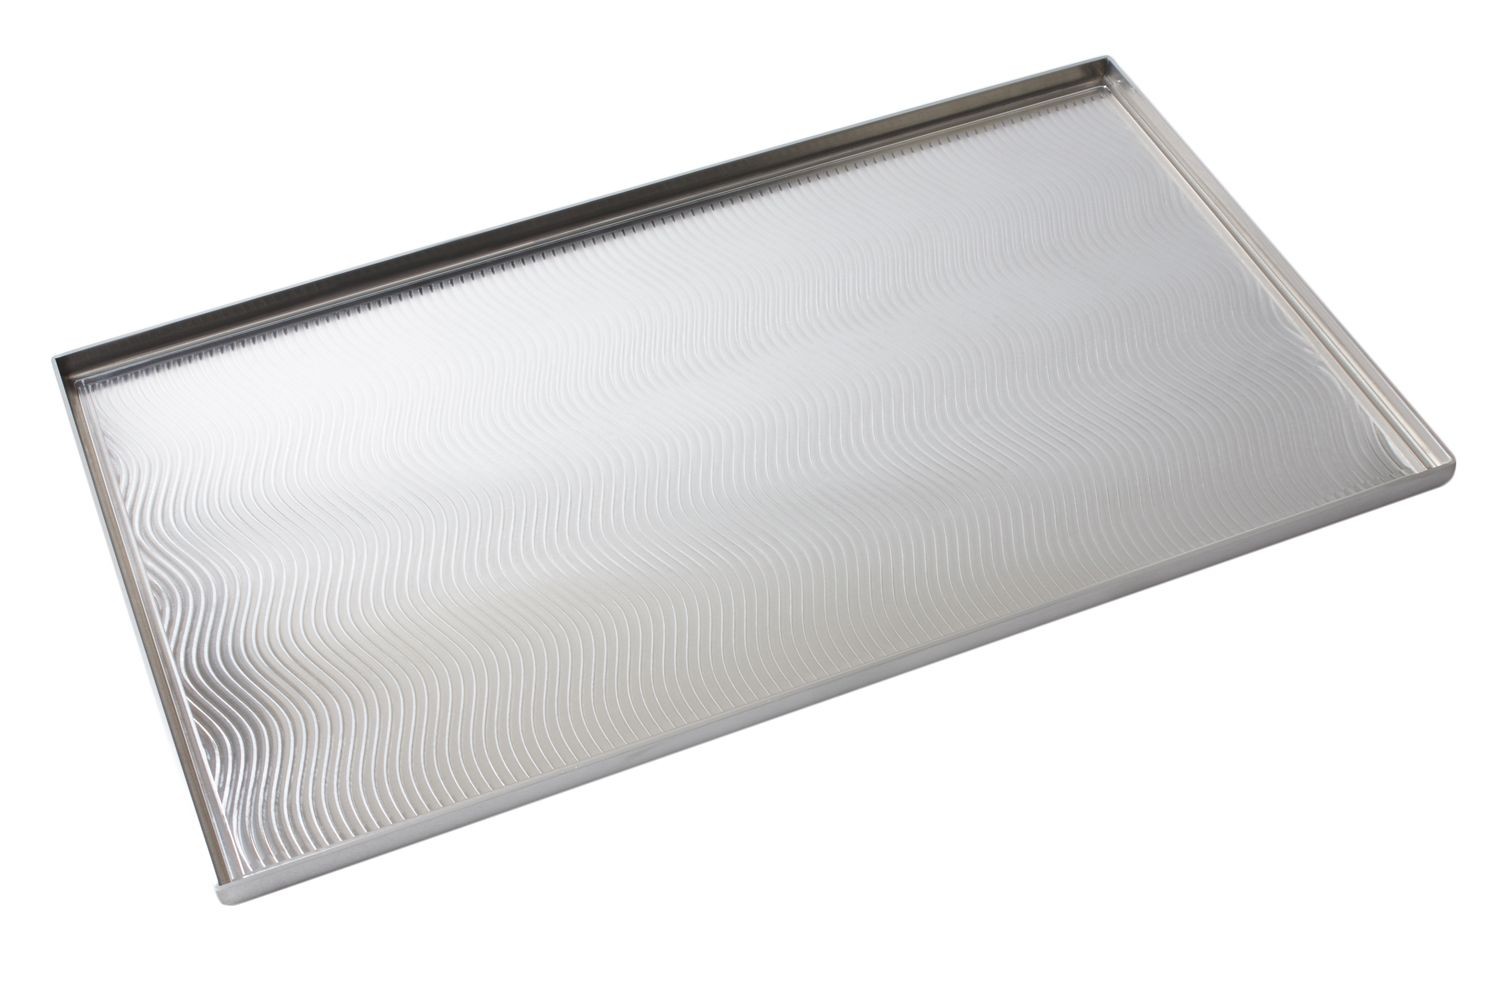 Bon Chef 2190SC 3 Well Hot Wave Grill Tray, 43" x 24 3/4"